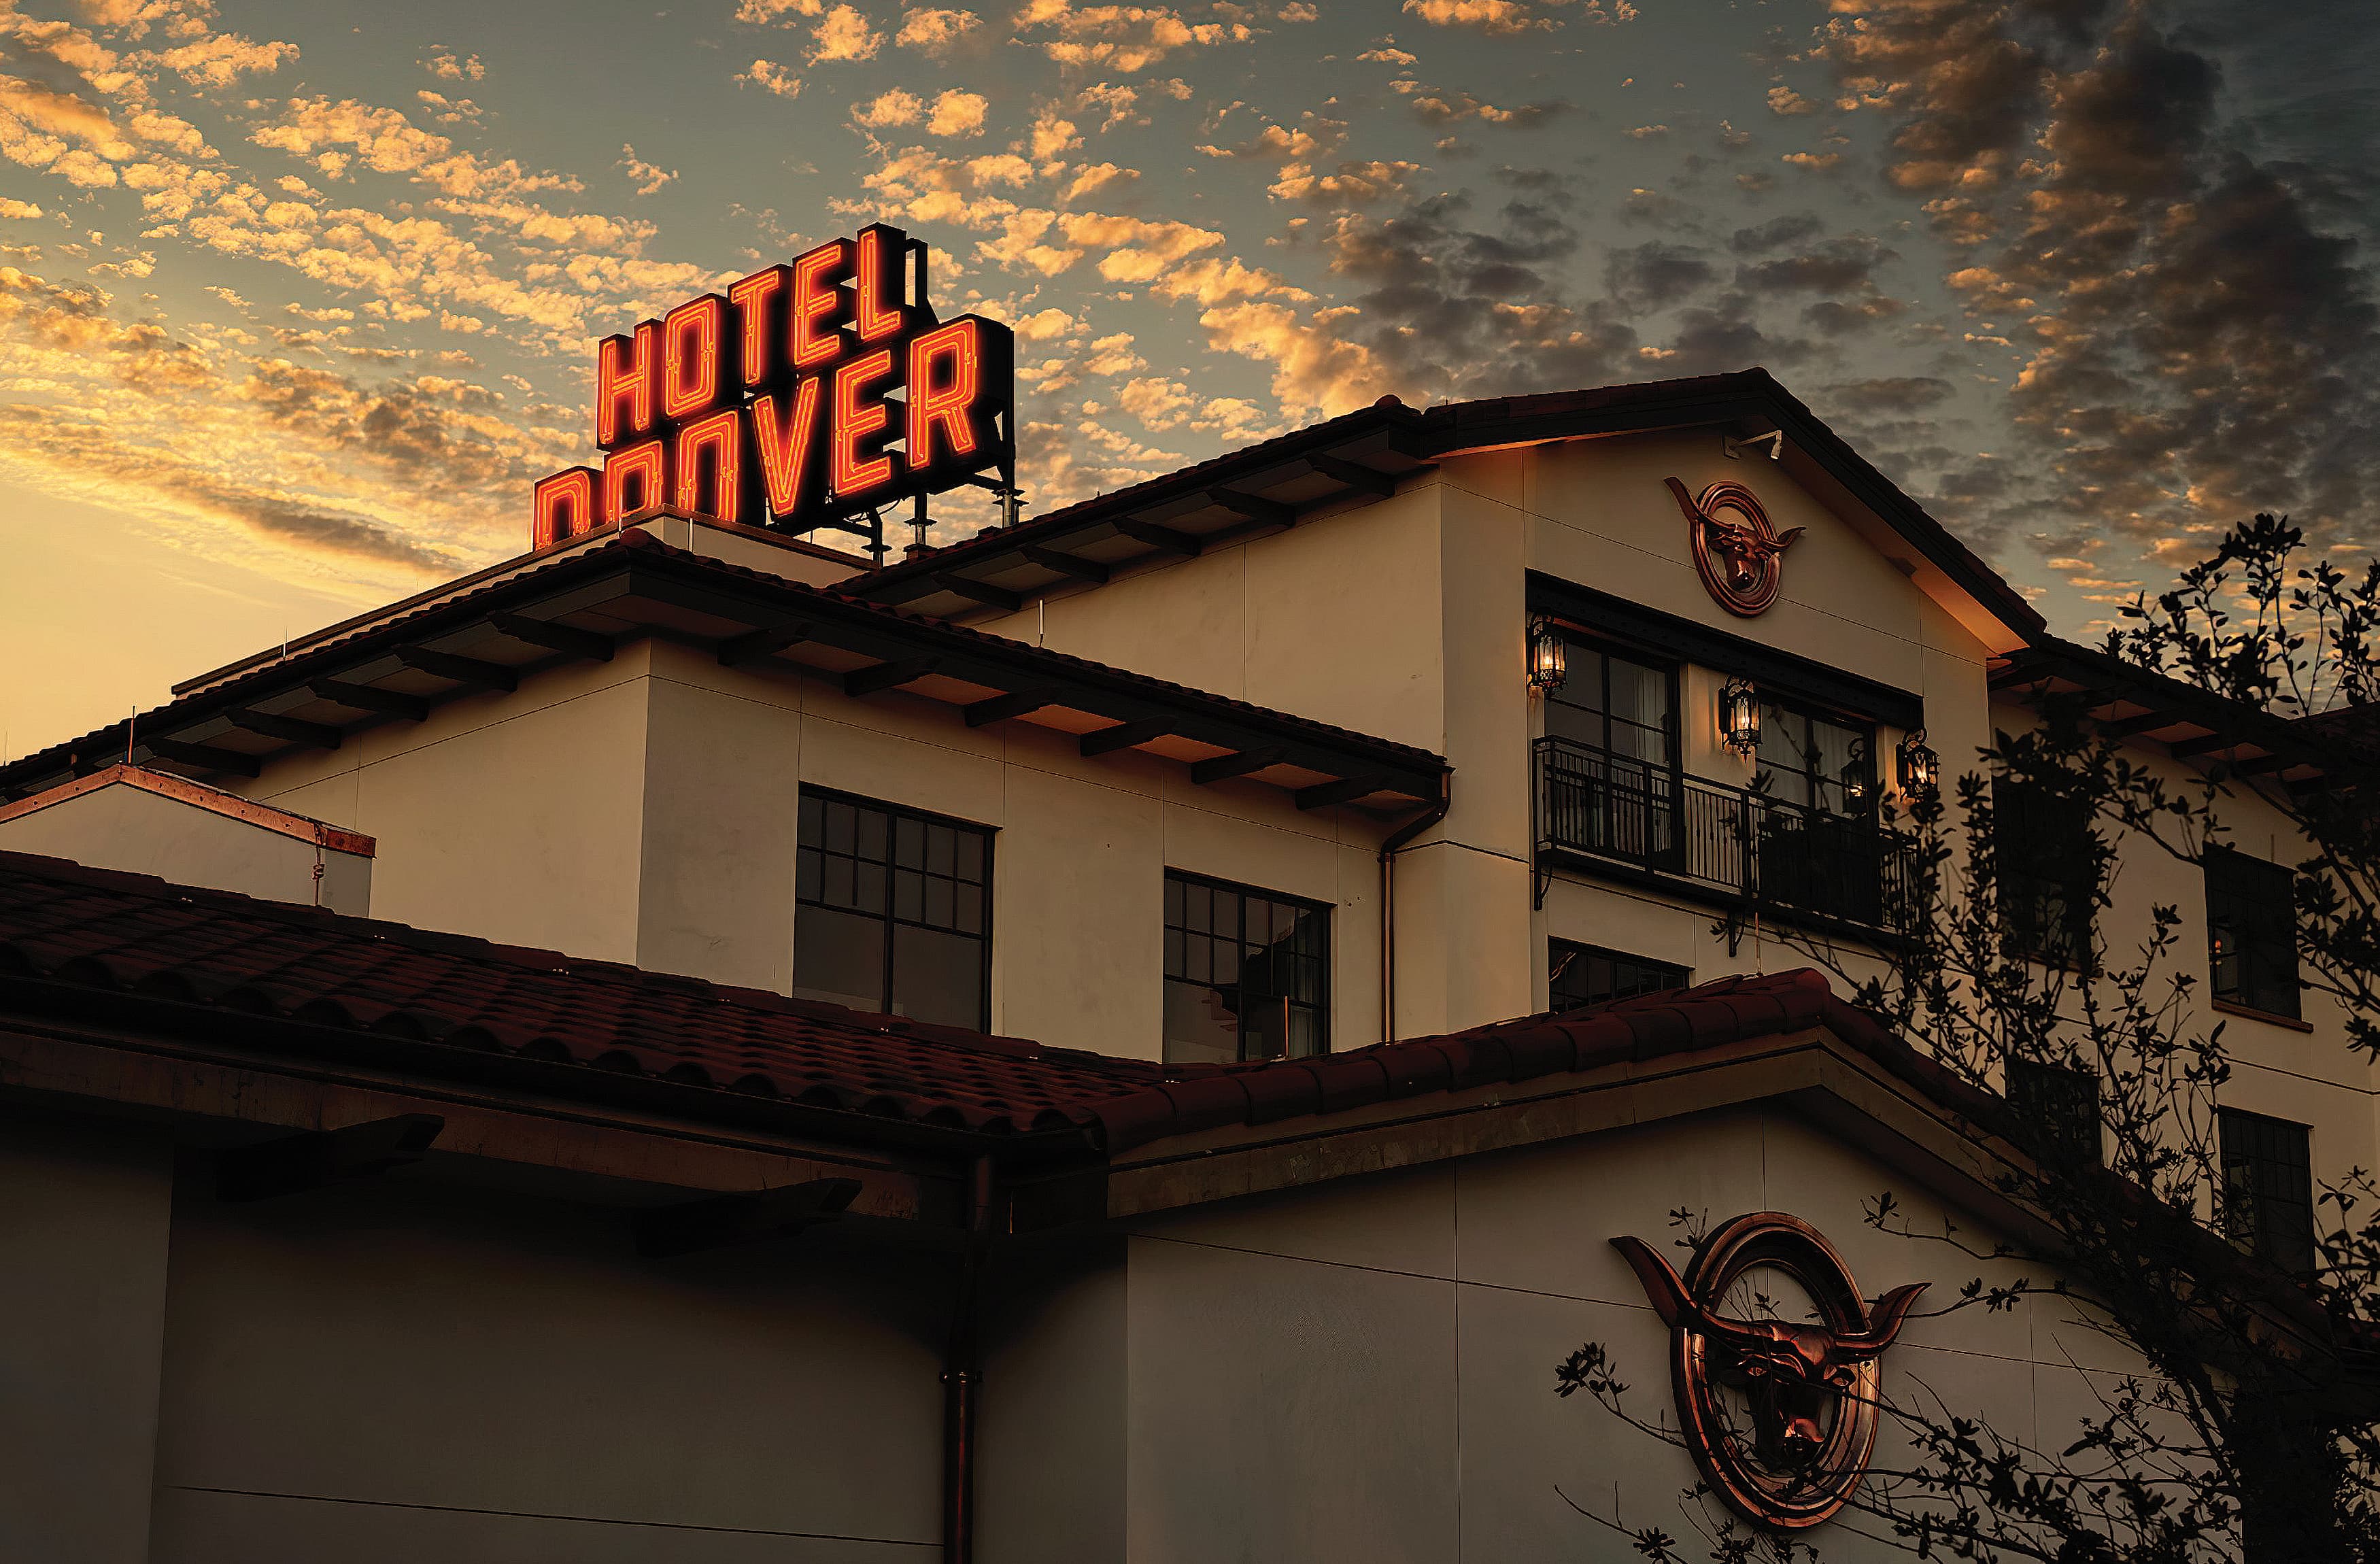 Orange neon exterior rooftop identity for The Drover Hotel in Fort Worth, Texas. 